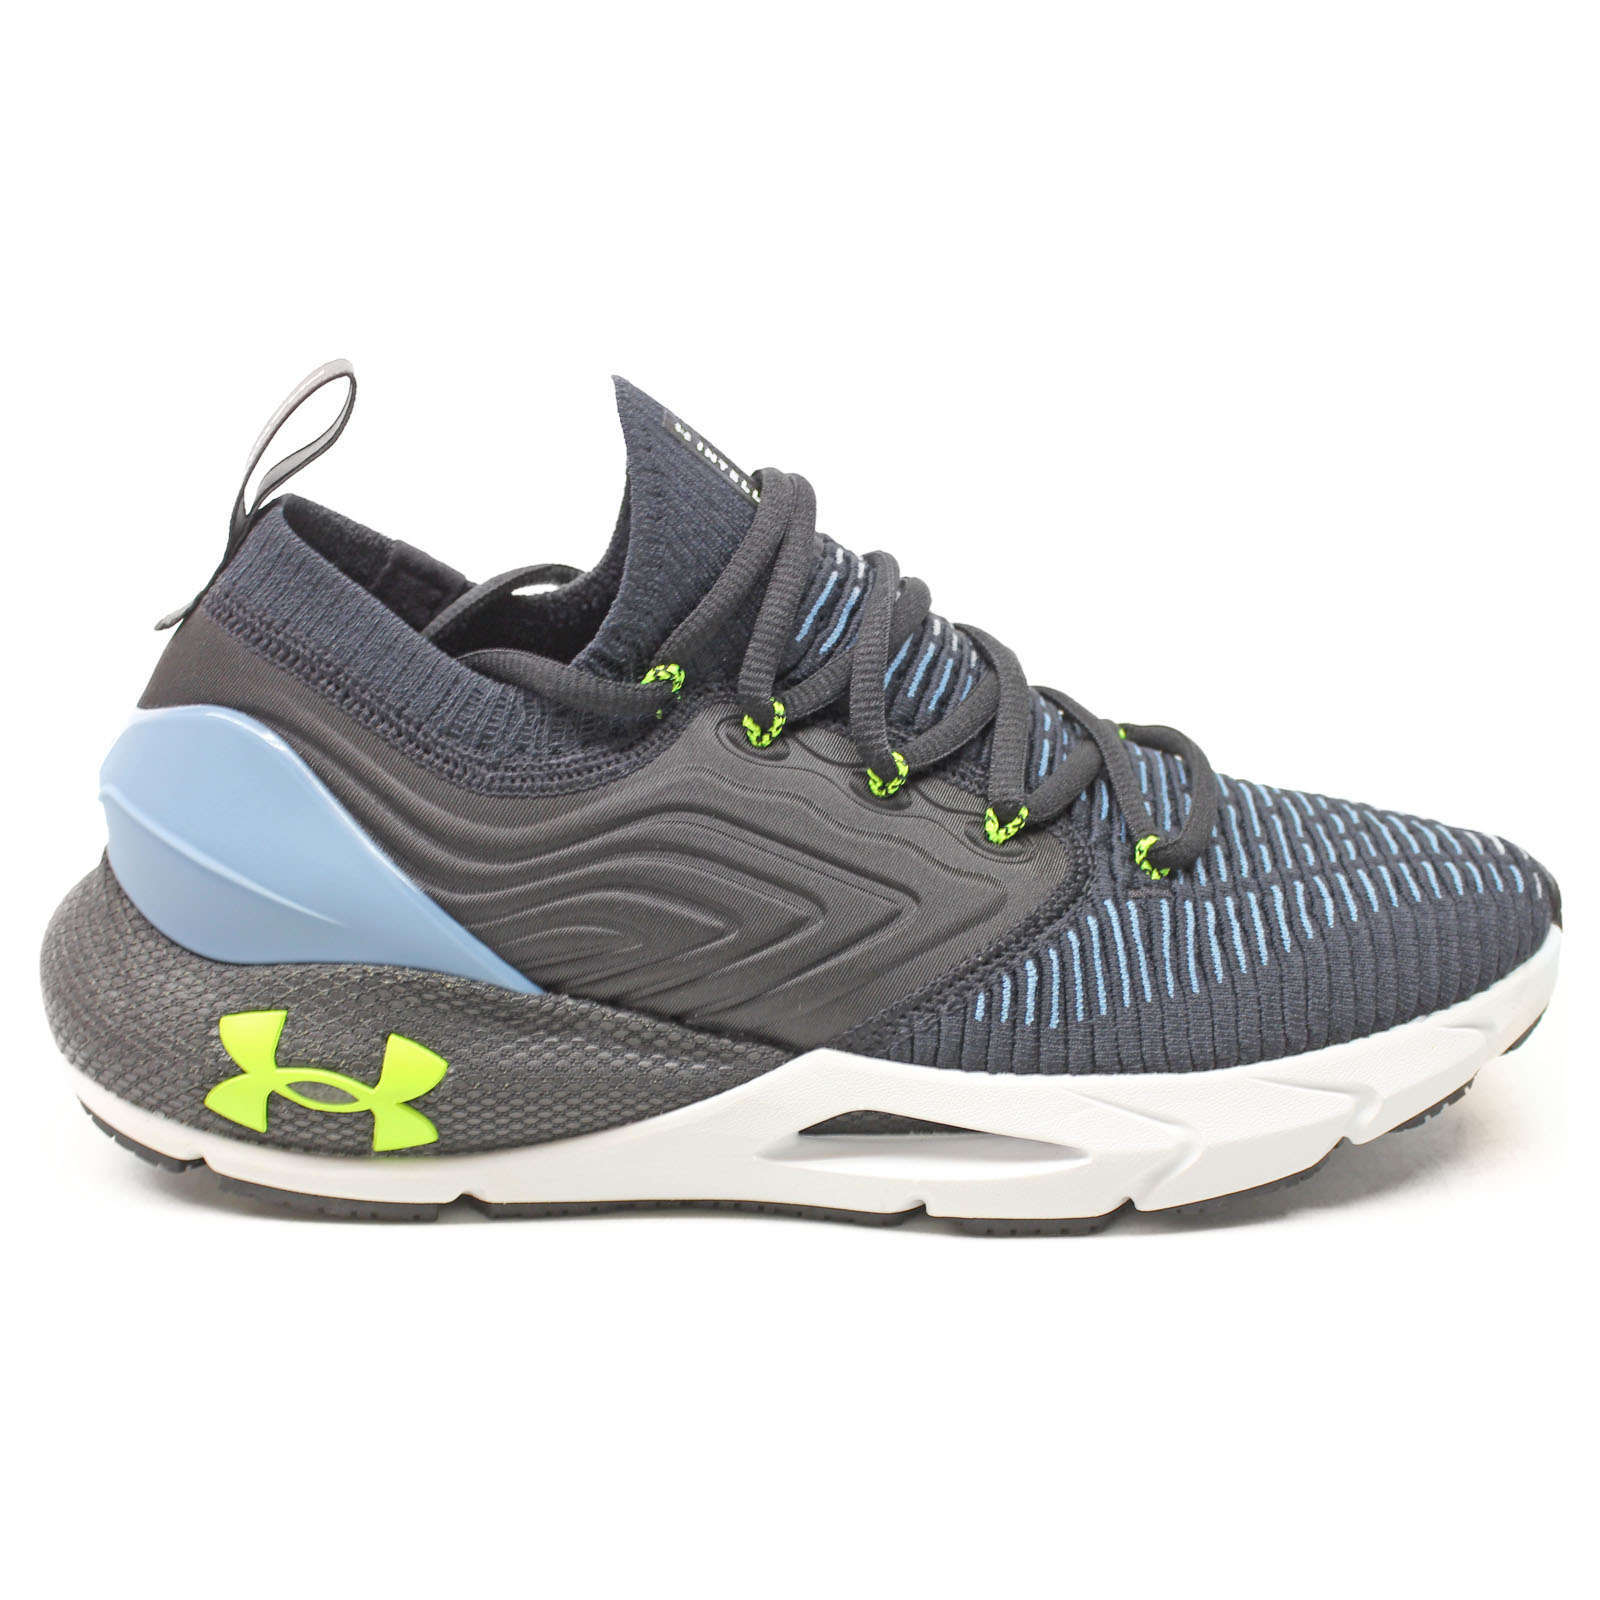 Under Armour HOVR Phantom 2 INKNT Synthetic Textile Men's Low-Top Sneakers#color_black black blue